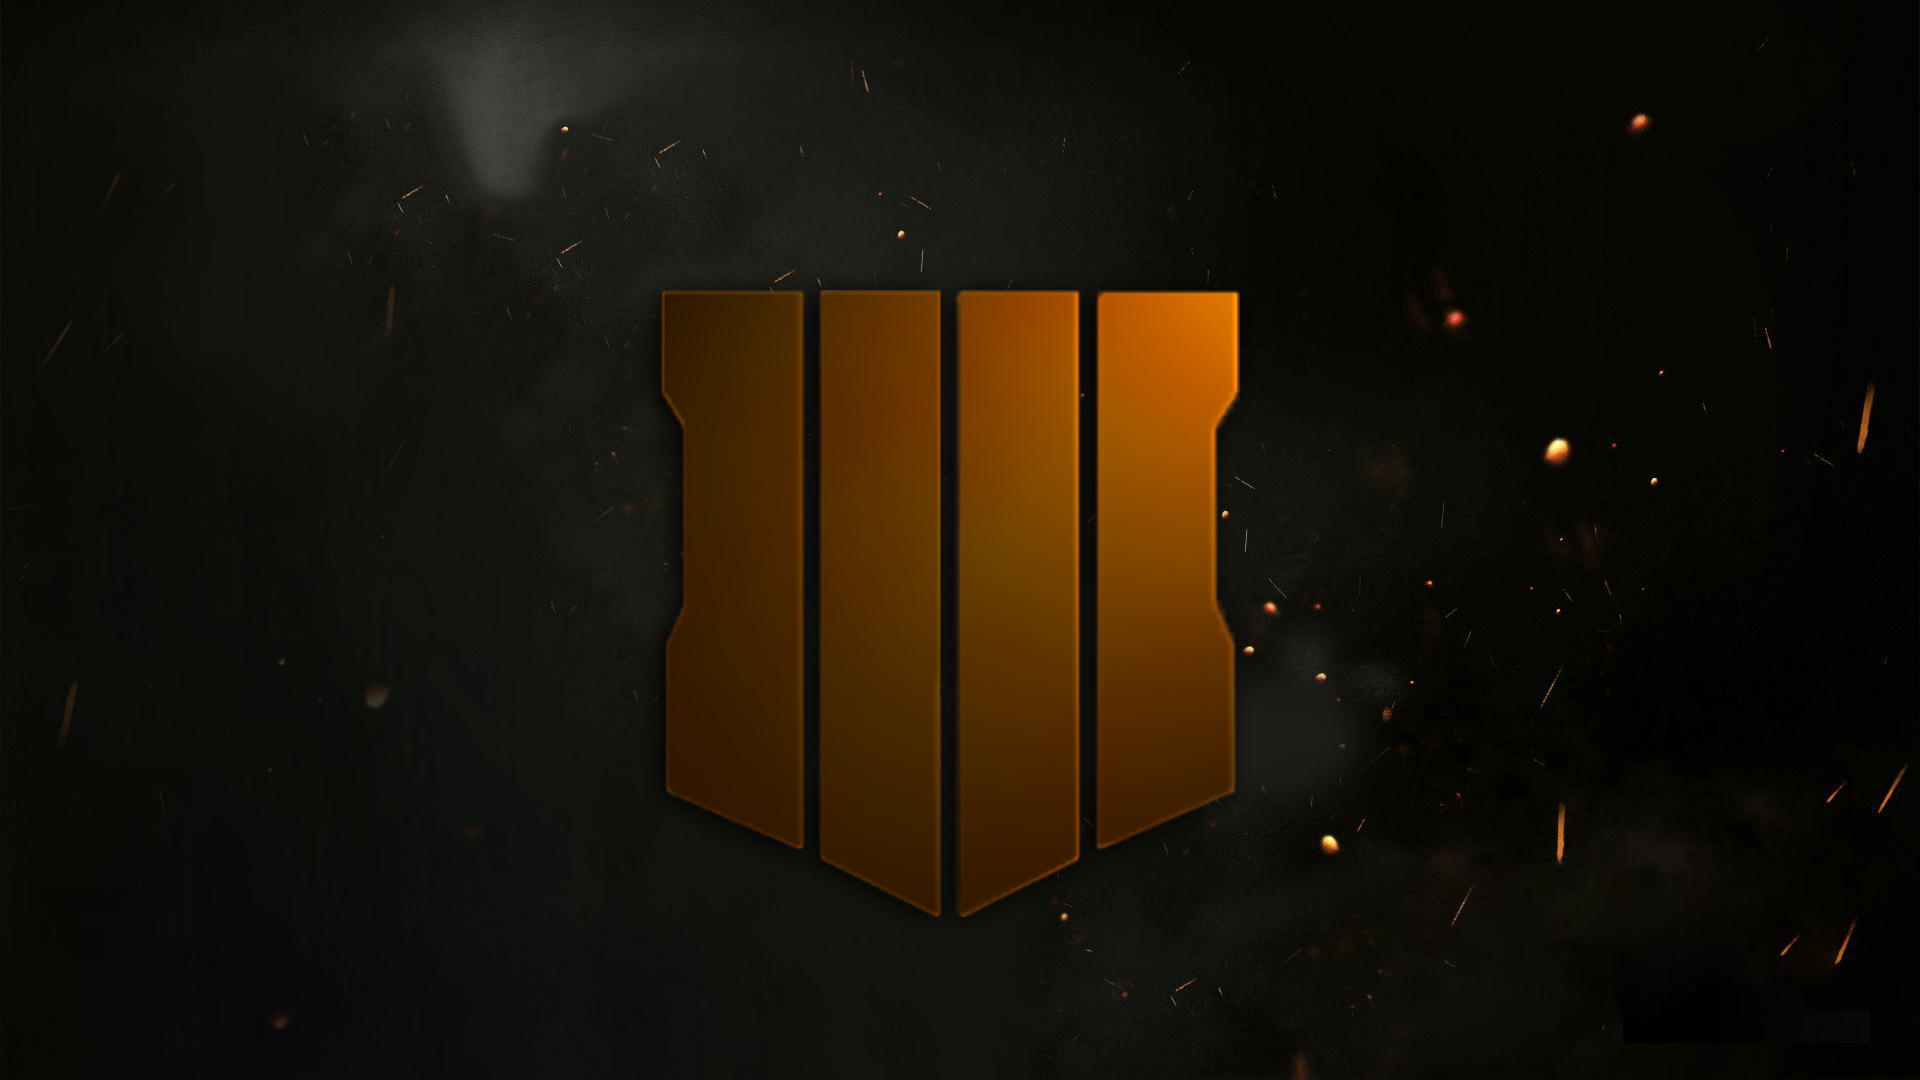 80 Call Of Duty Black Ops 4 HD Wallpapers and Backgrounds